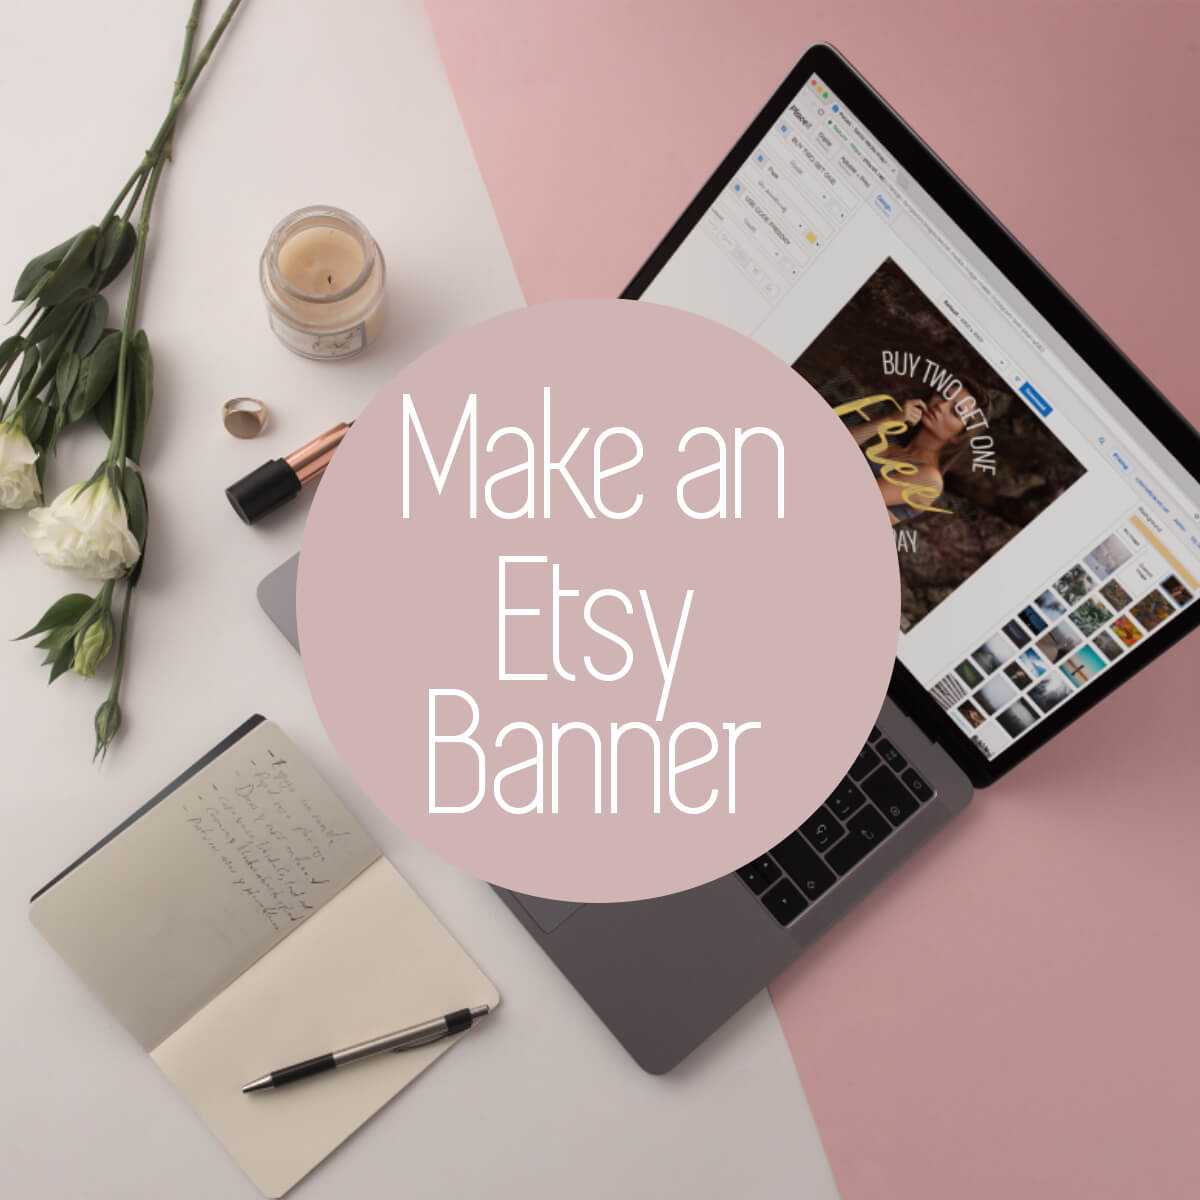 Personalize Your Etsy Shop - Cover Photos And Banners Inside Free Etsy Banner Template